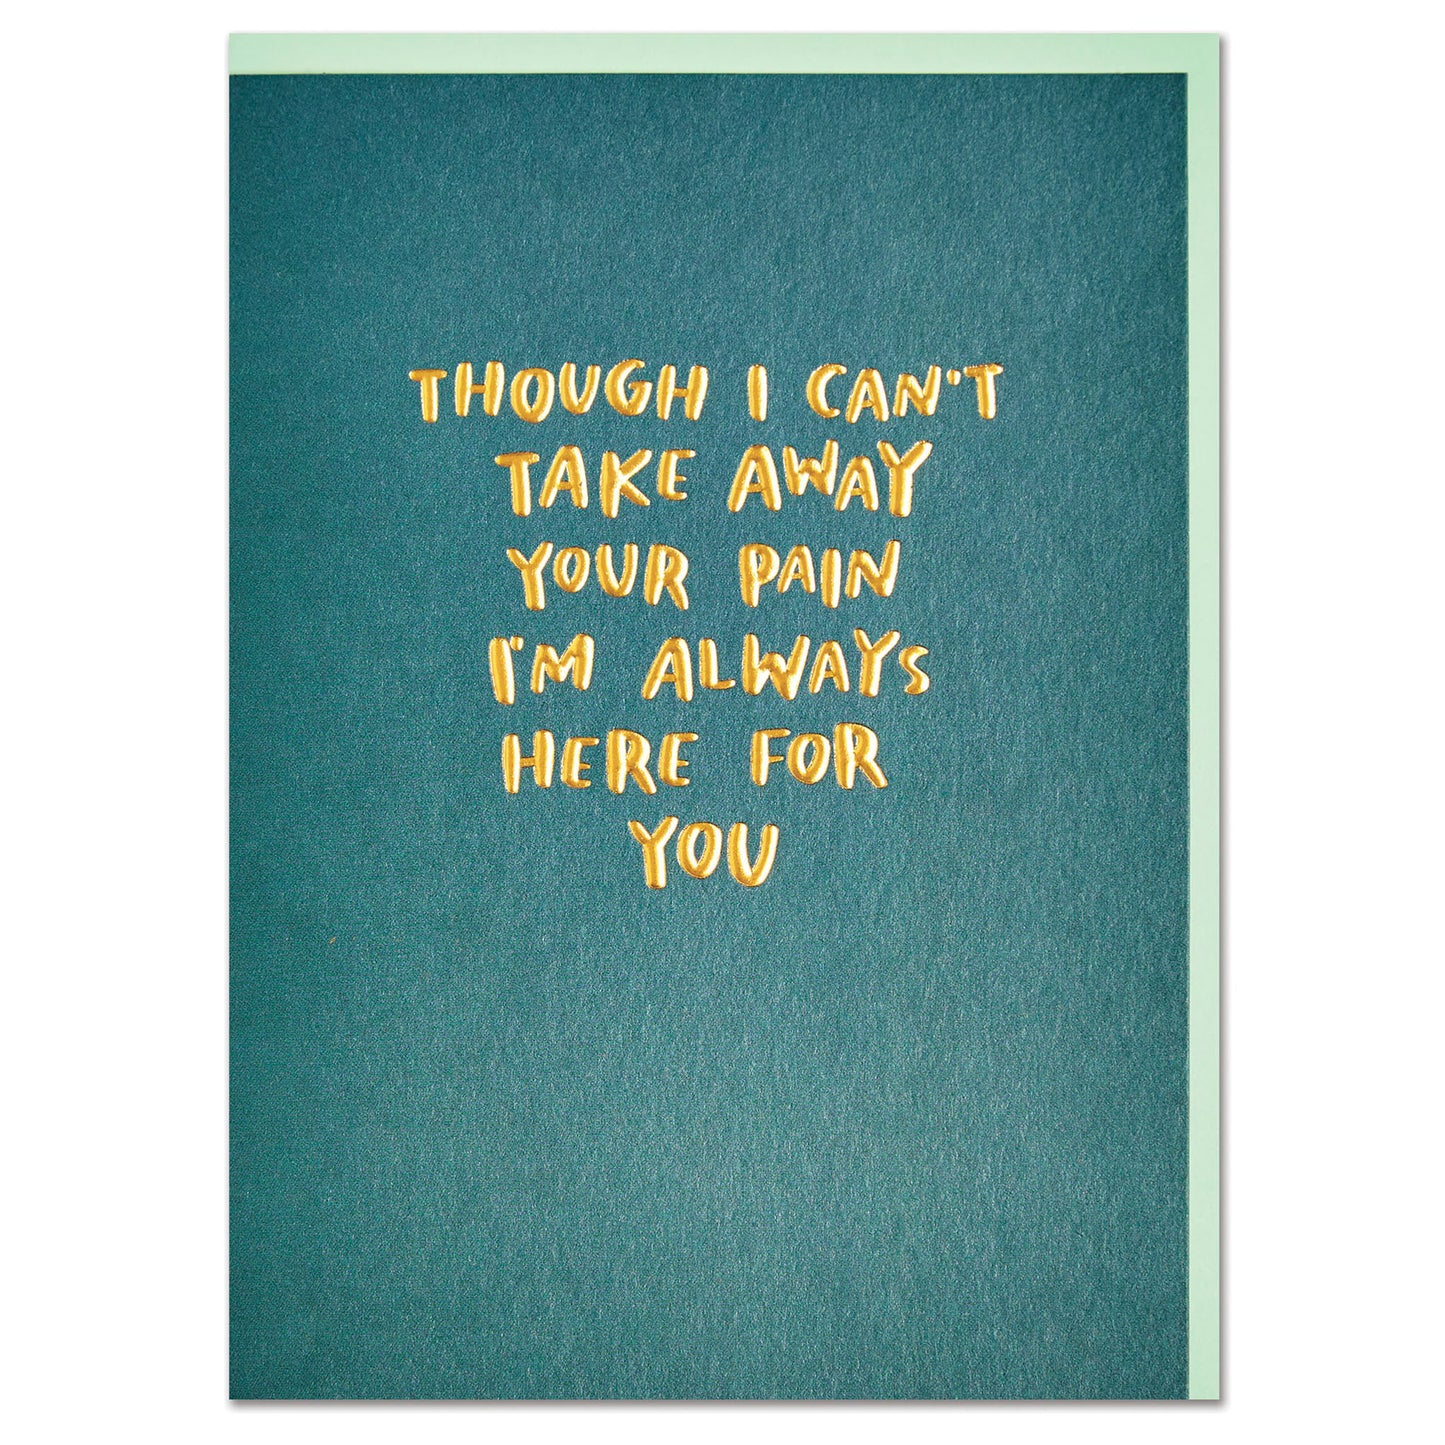 I'm always here for you Card